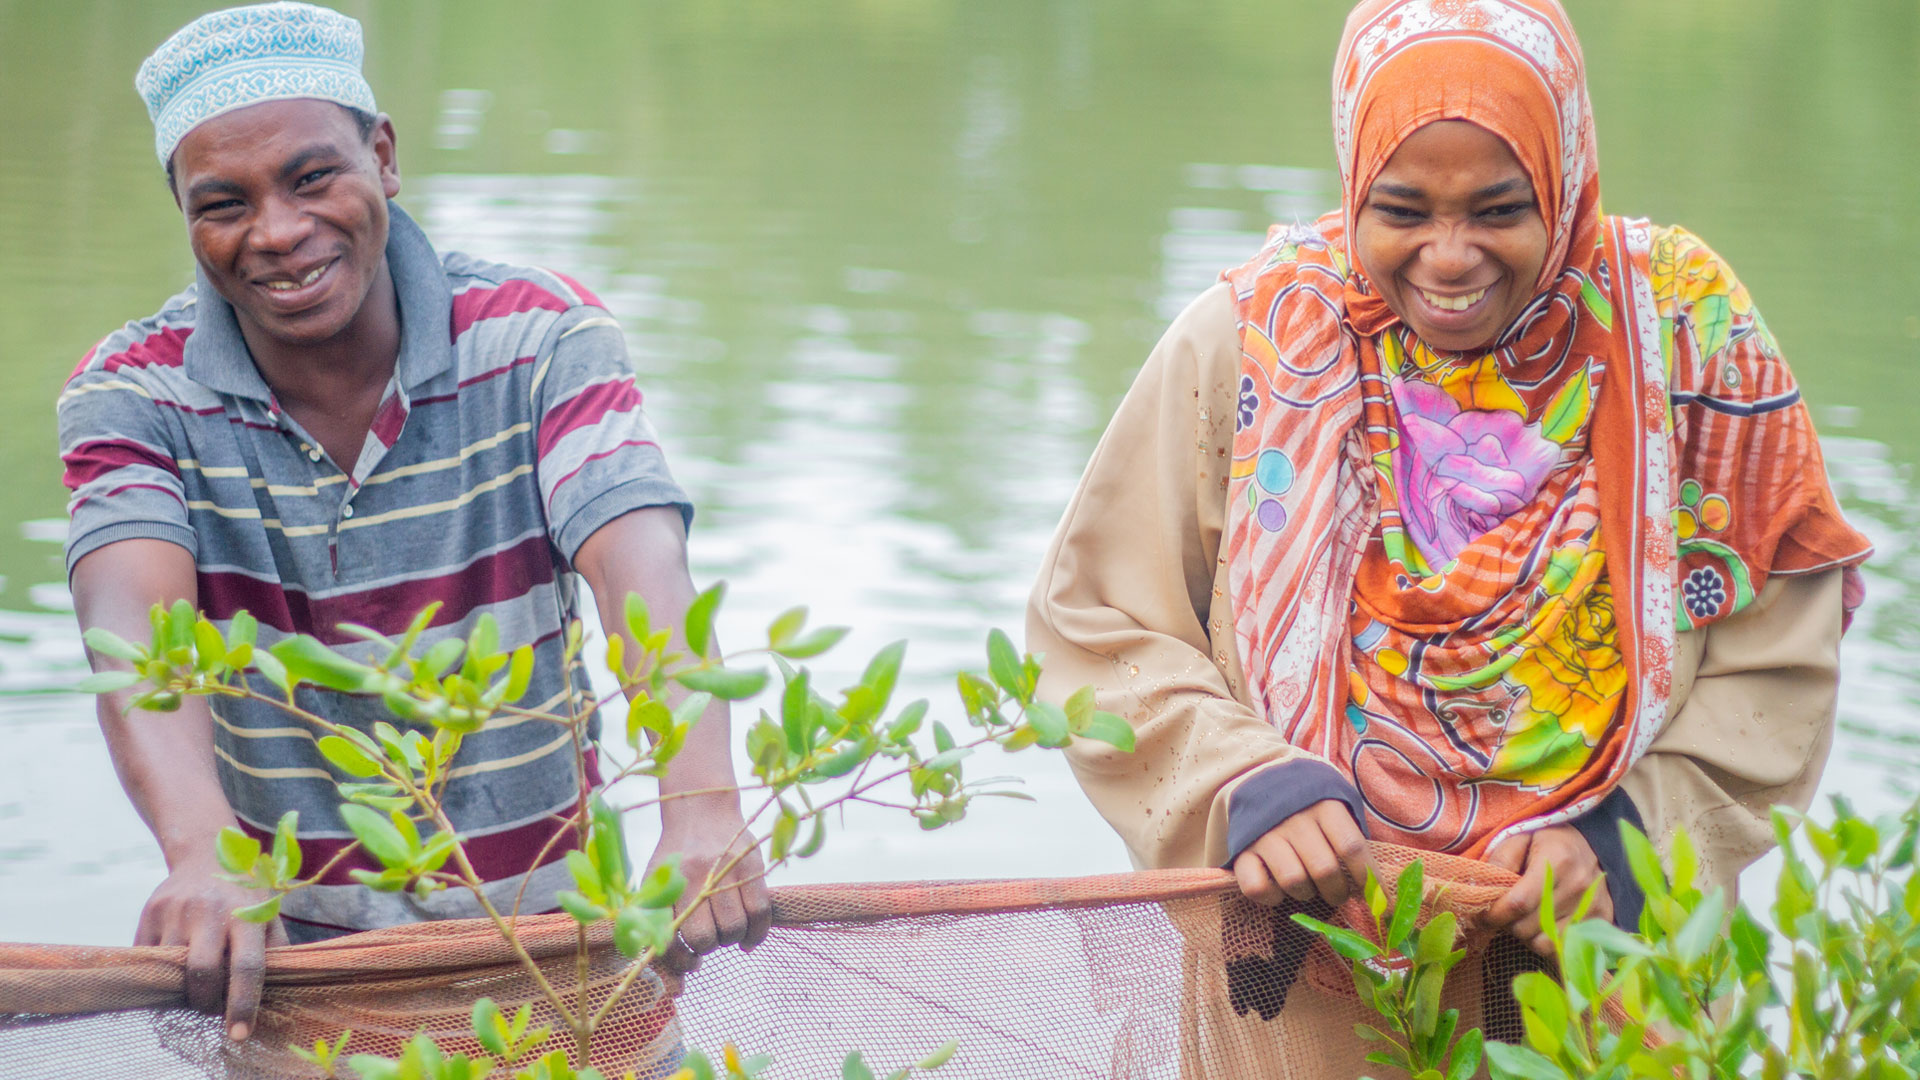 A male and female member of a youth group supported by the project work together on their aquaculture project in Pemba, Zanzibar